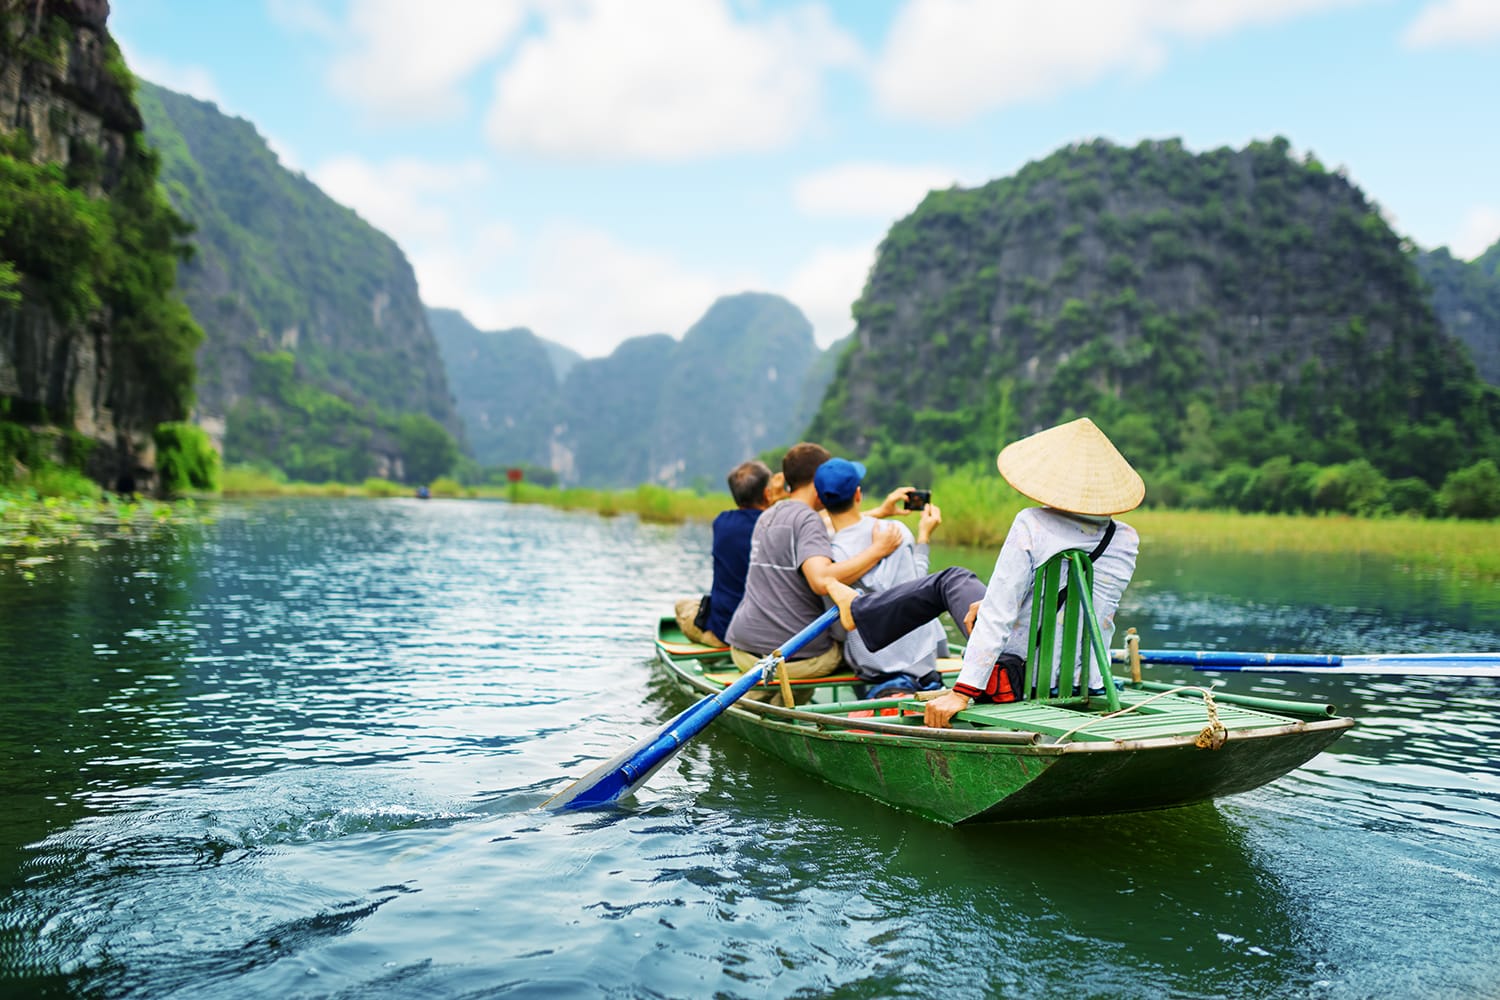 Tourists traveling in boat along the Ngo Dong River and taking picture of the Tam Coc, Ninh Binh, Vietnam. Rower using her feet to propel oars. Landscape formed by karst towers and rice fields.